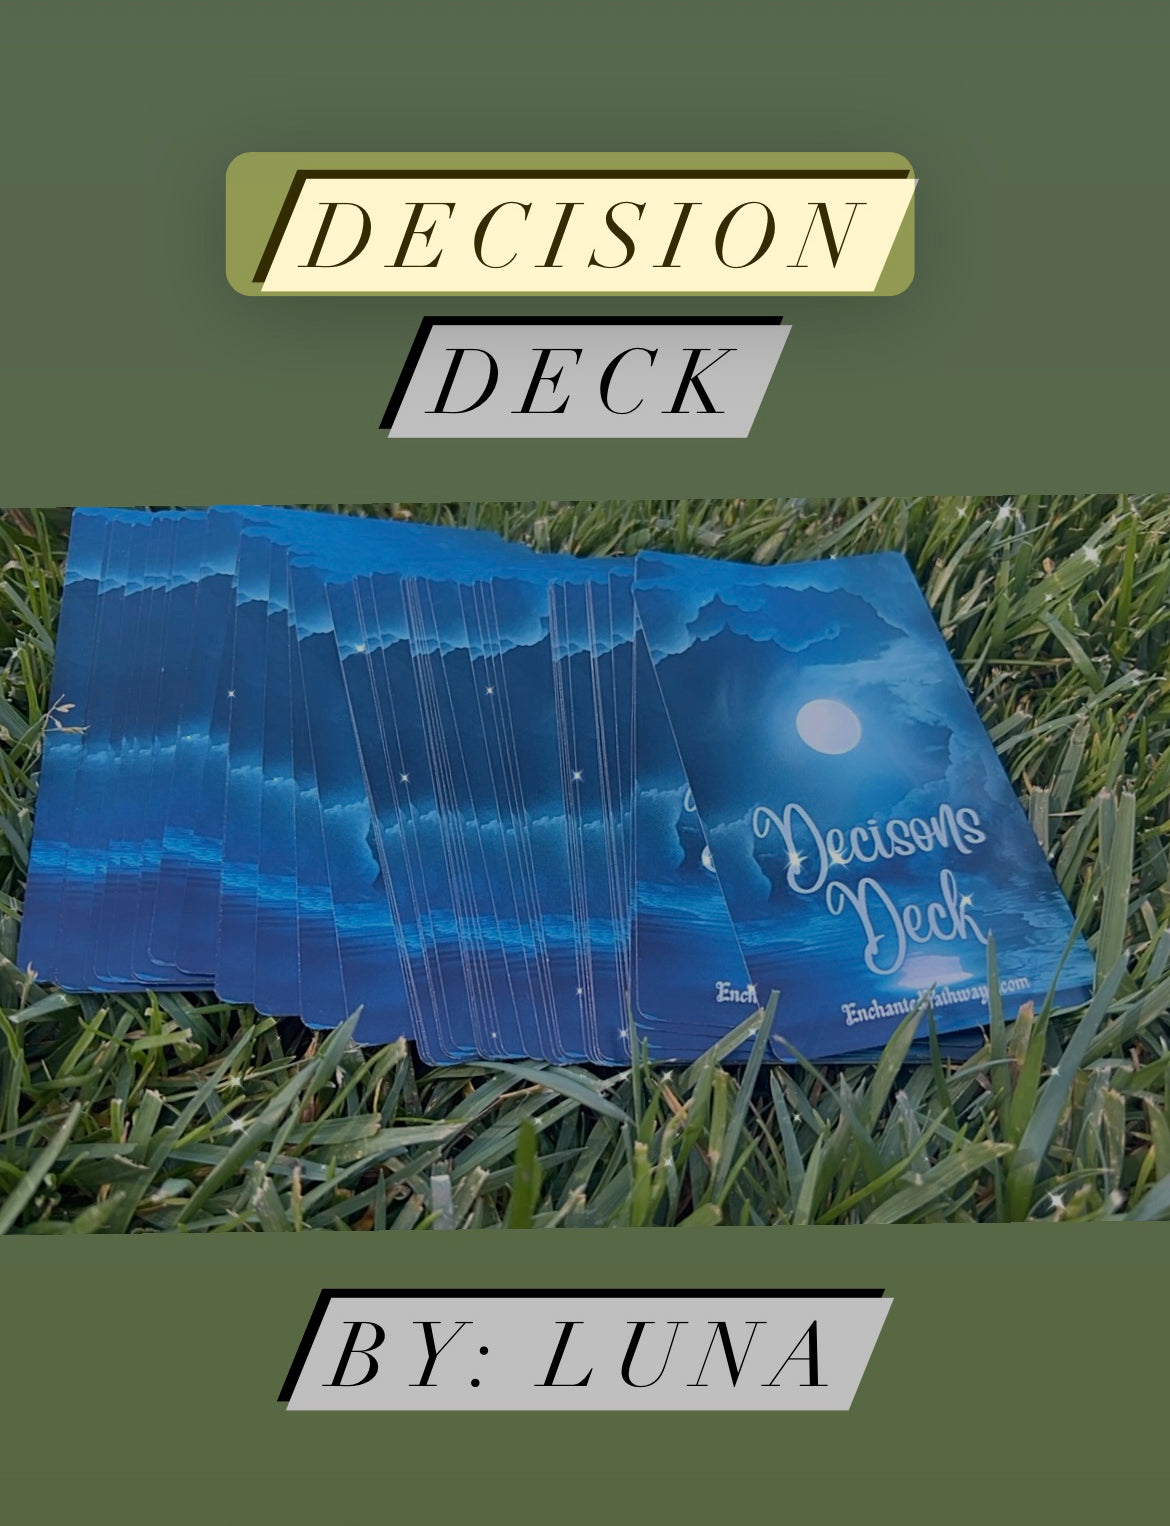 The Decisions Deck